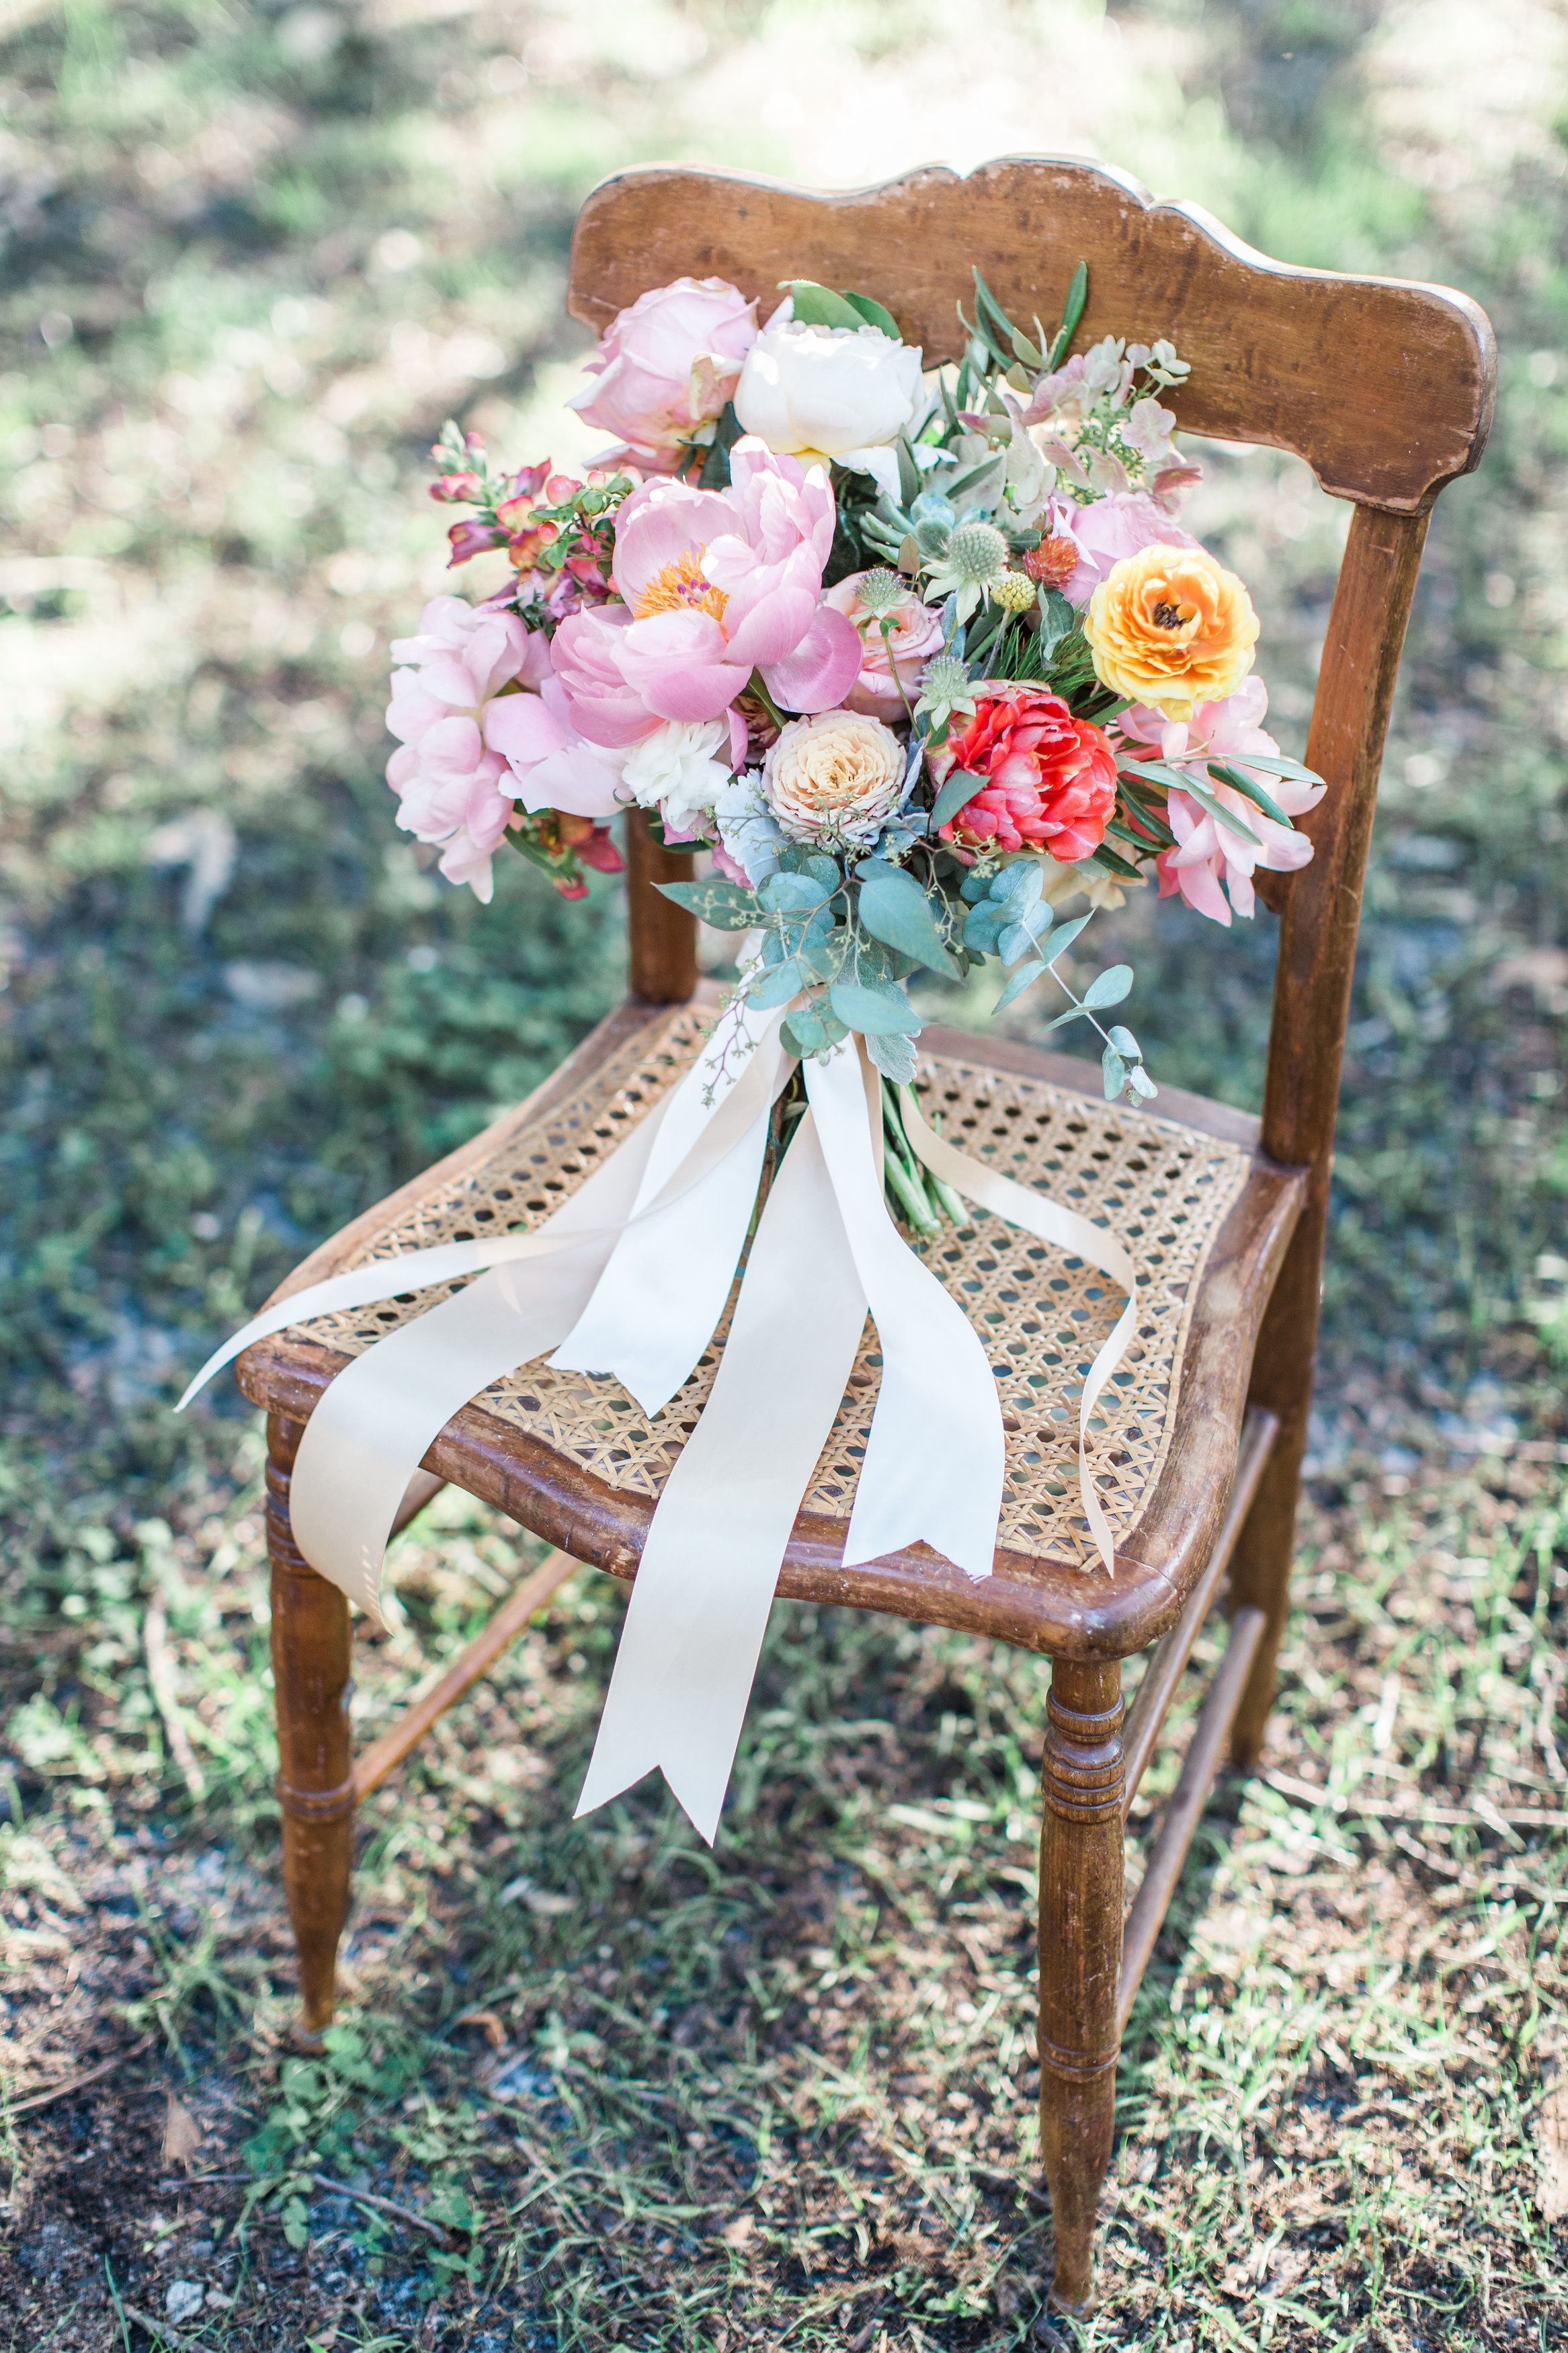 Romantic Pastel wedding inspiration in Savannah, GA by Colonial House of Flowers and Apt B Photography